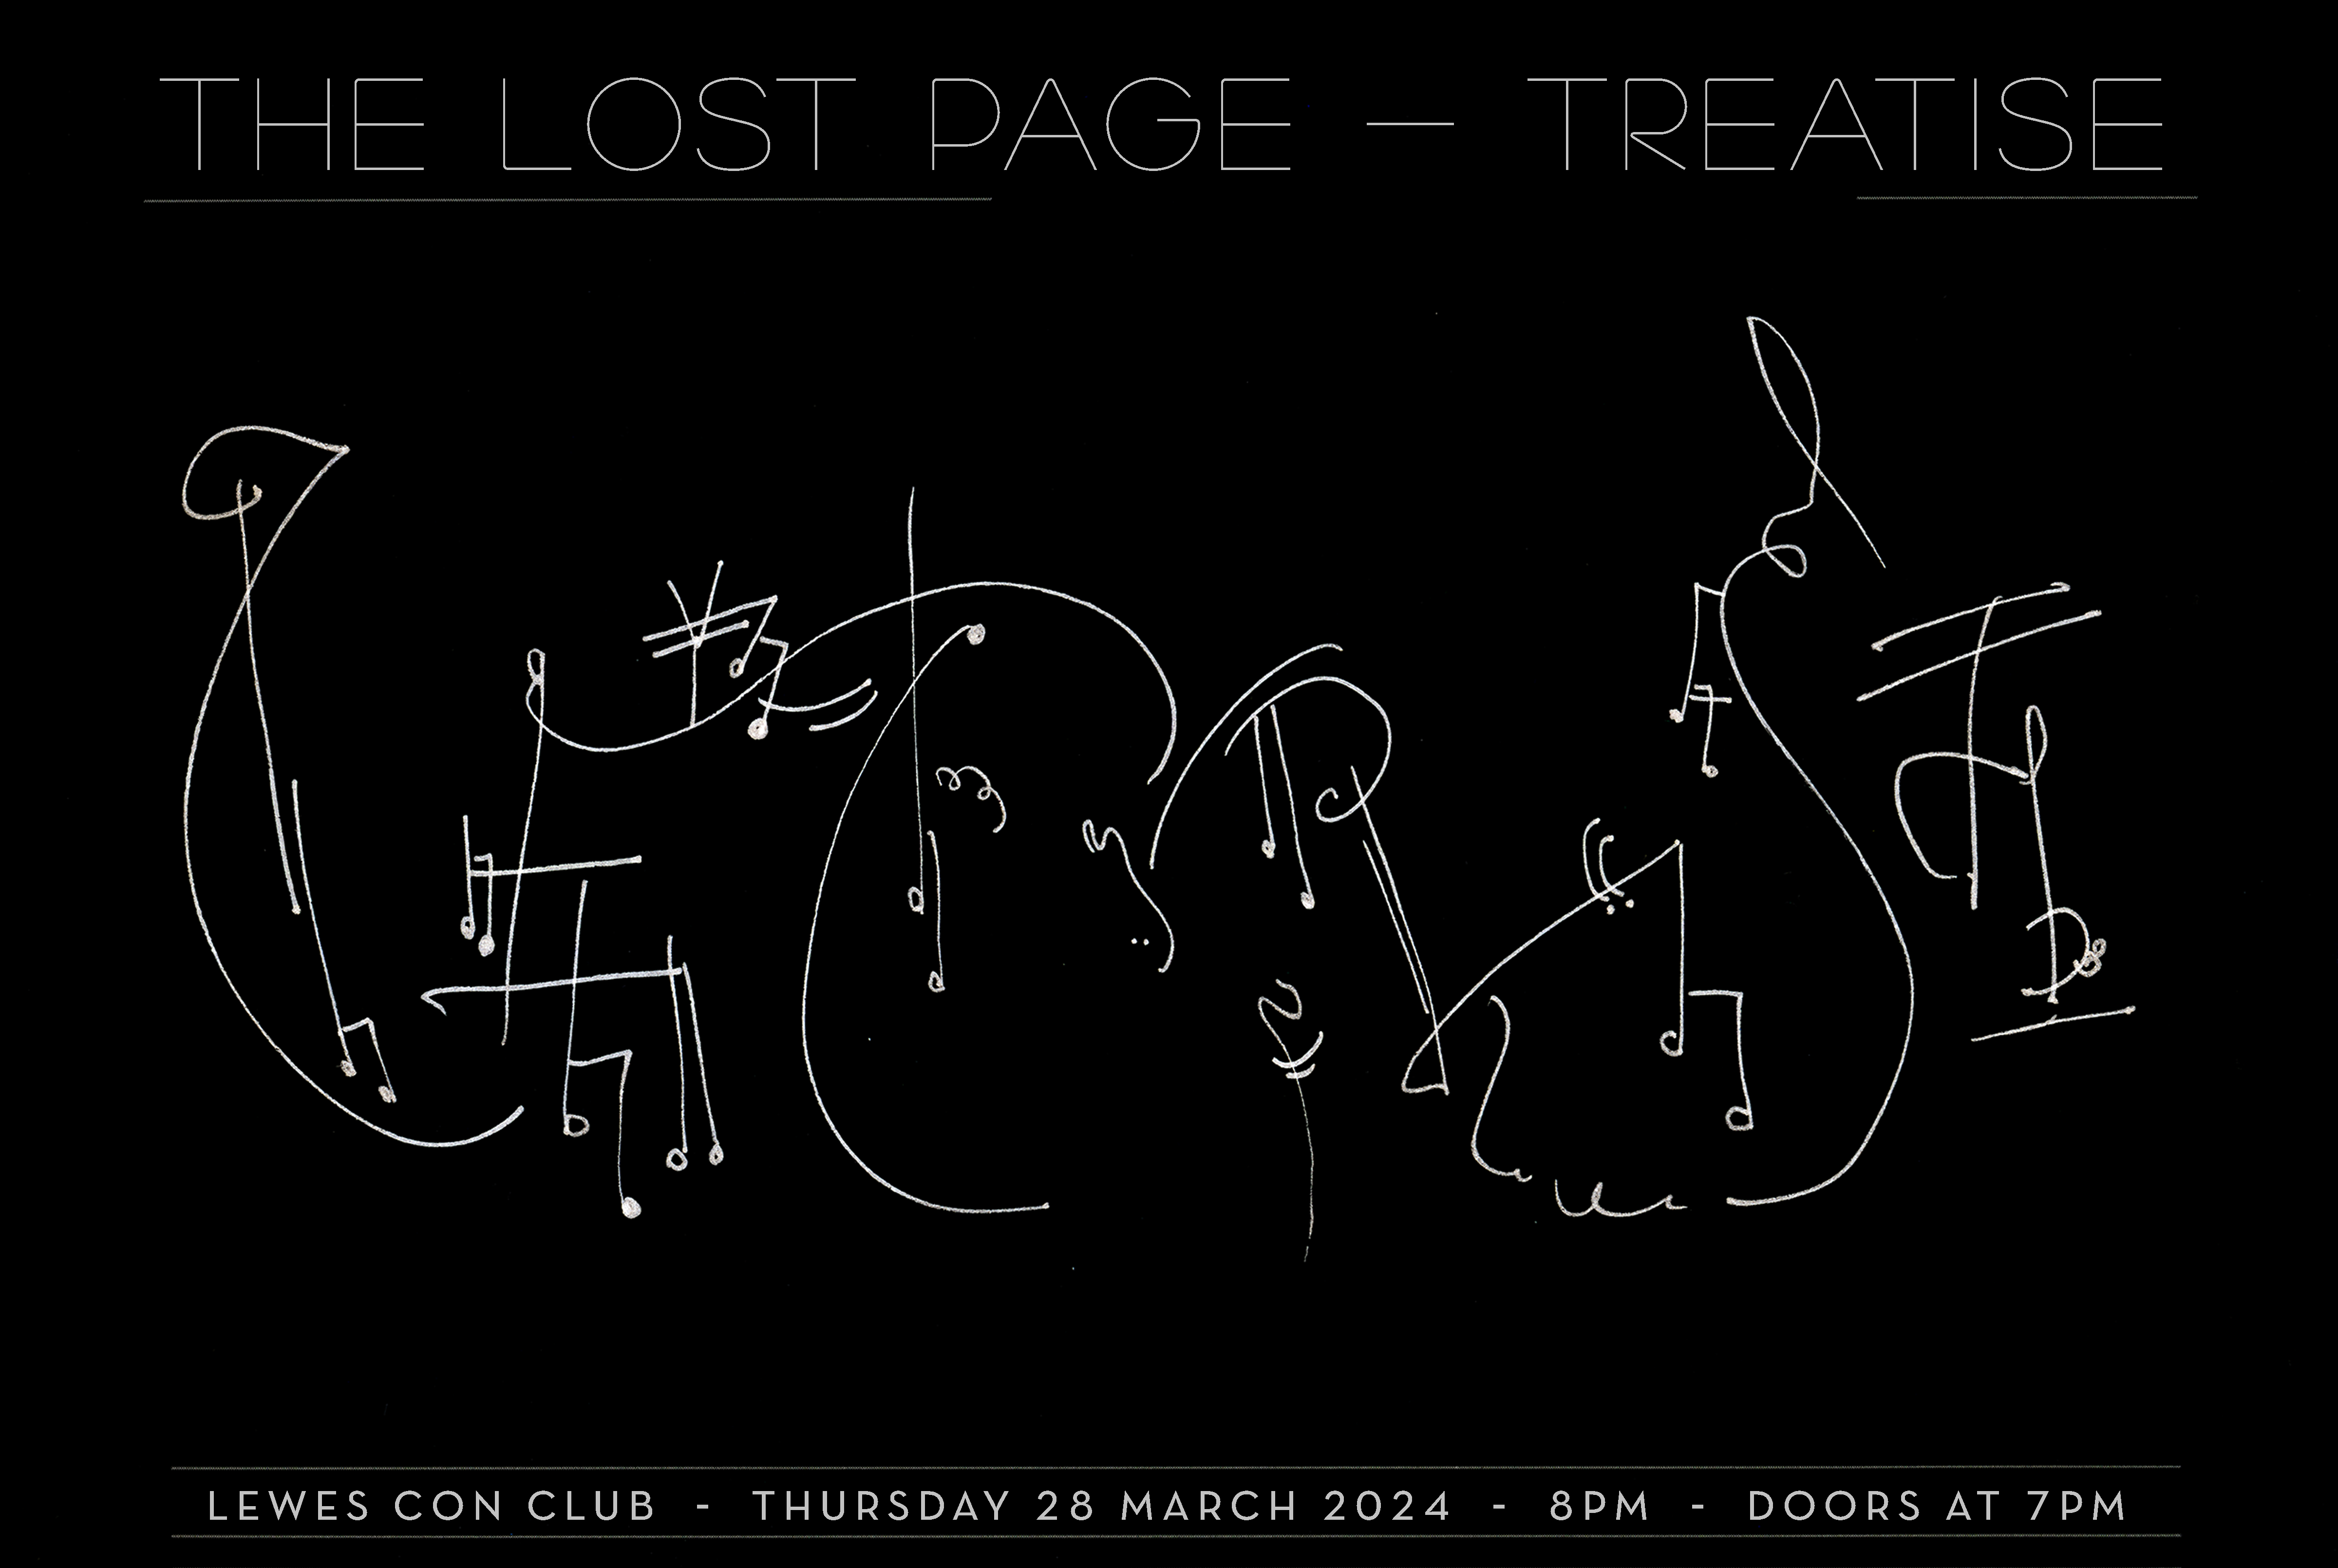 The Lost Page – Treatise